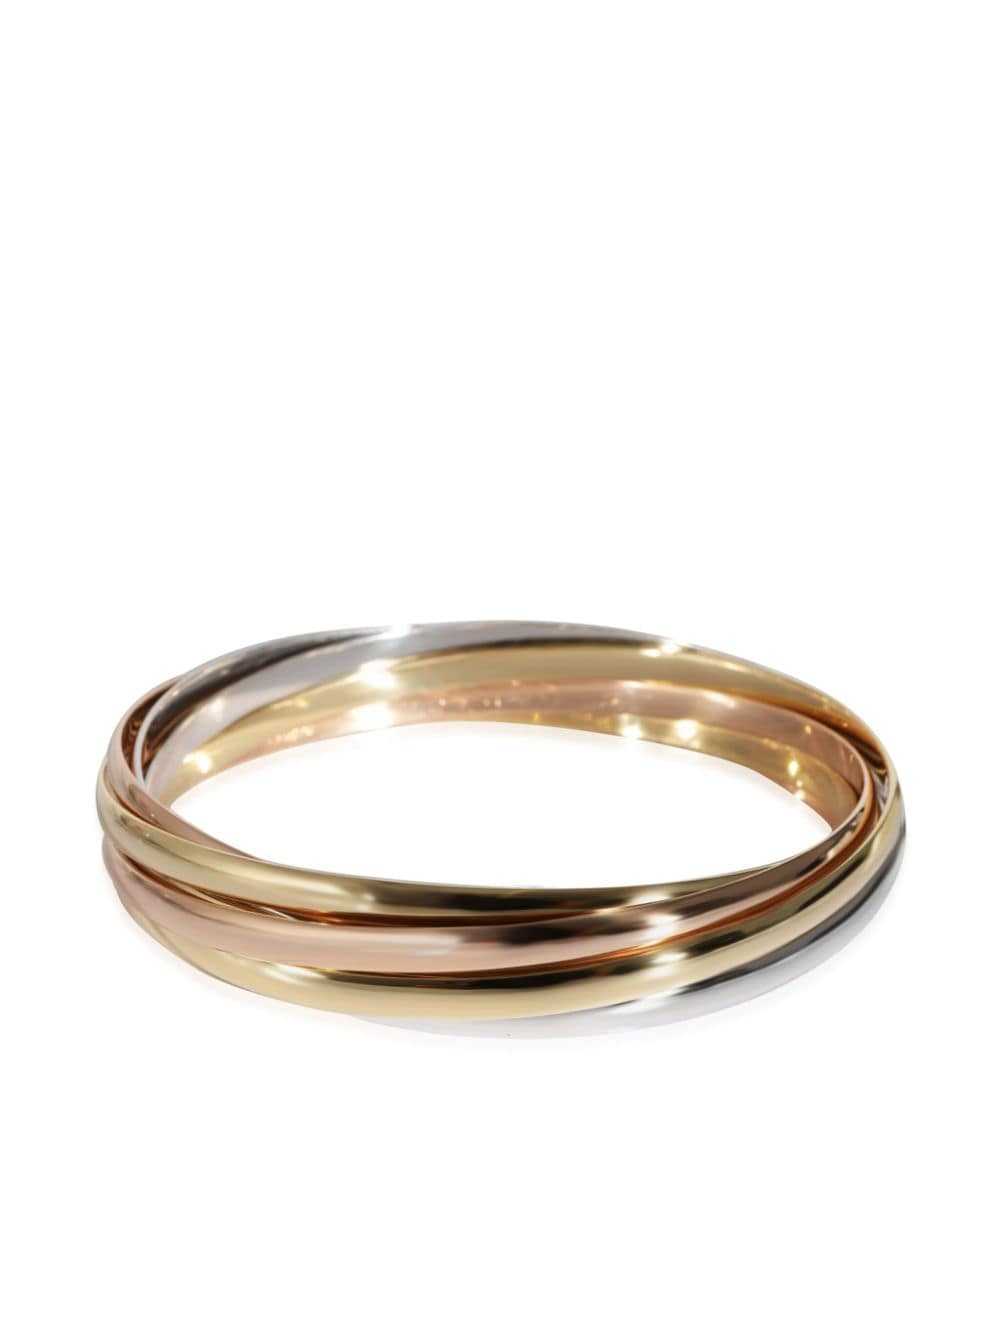 Cartier pre-owned 18kt gold Trinity bangle - image 1